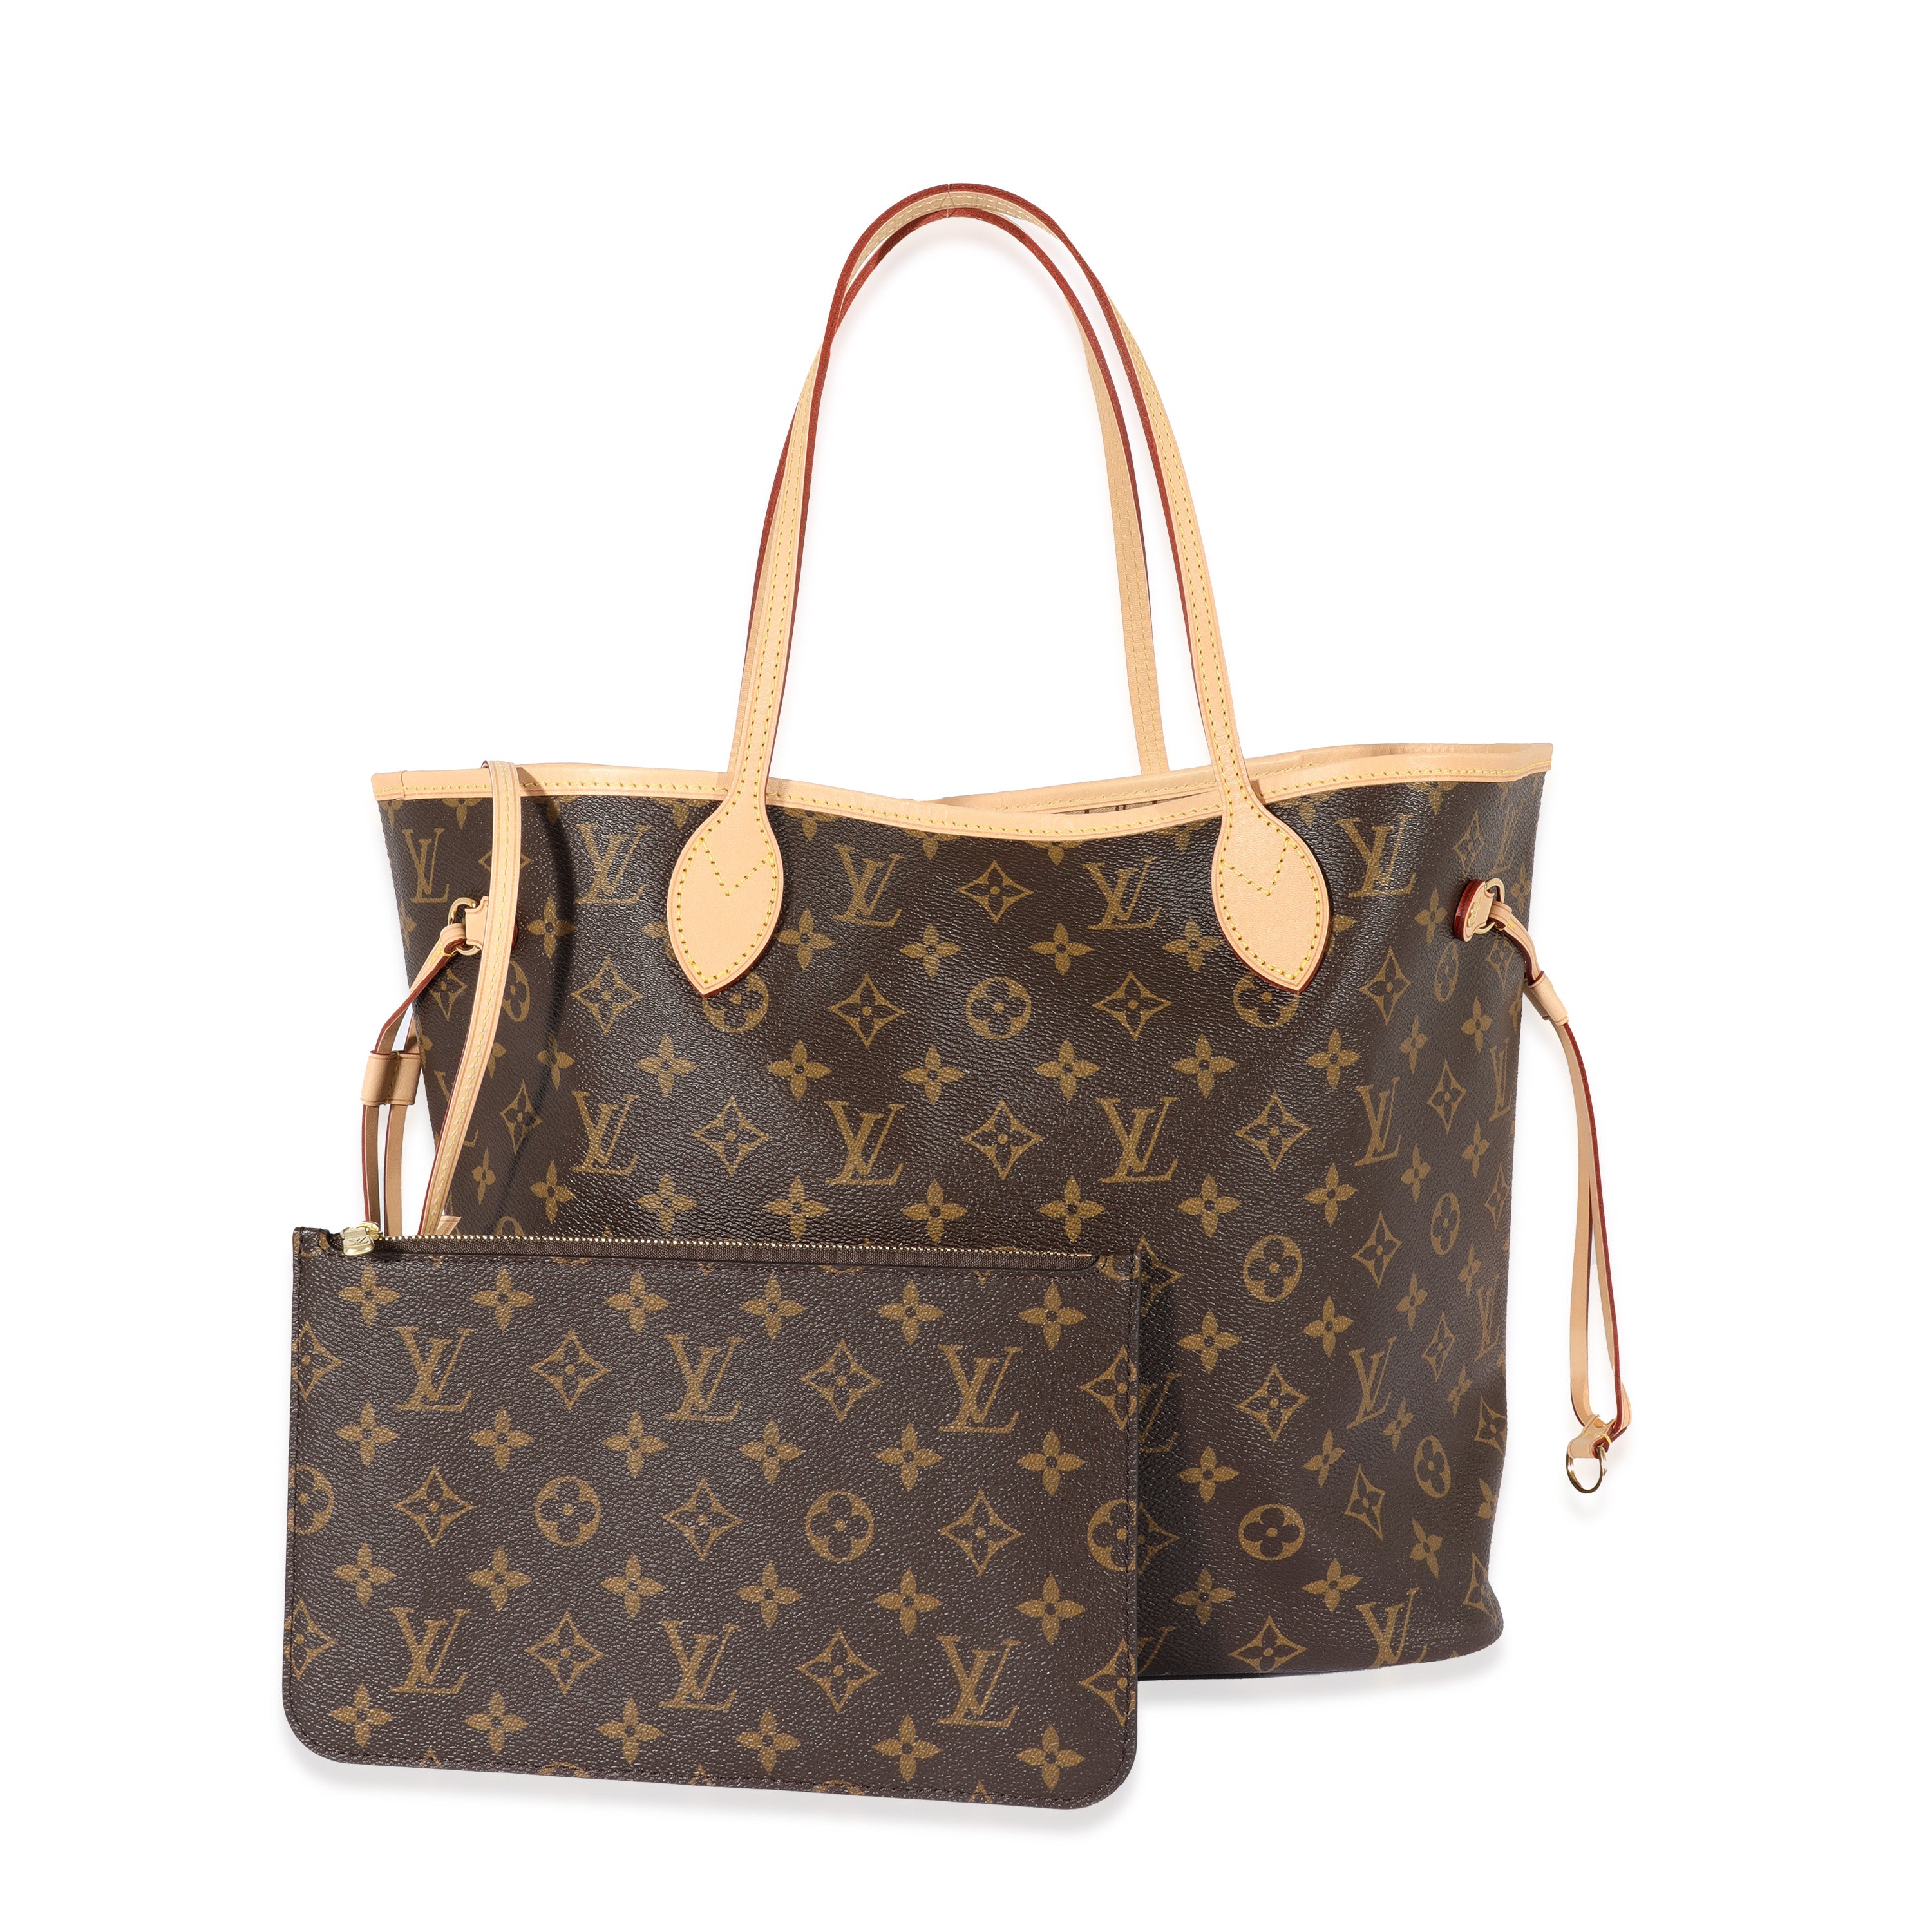 Louis Vuitton NEVERFULL : My Bag Of The Day & Shopping With My Husband 